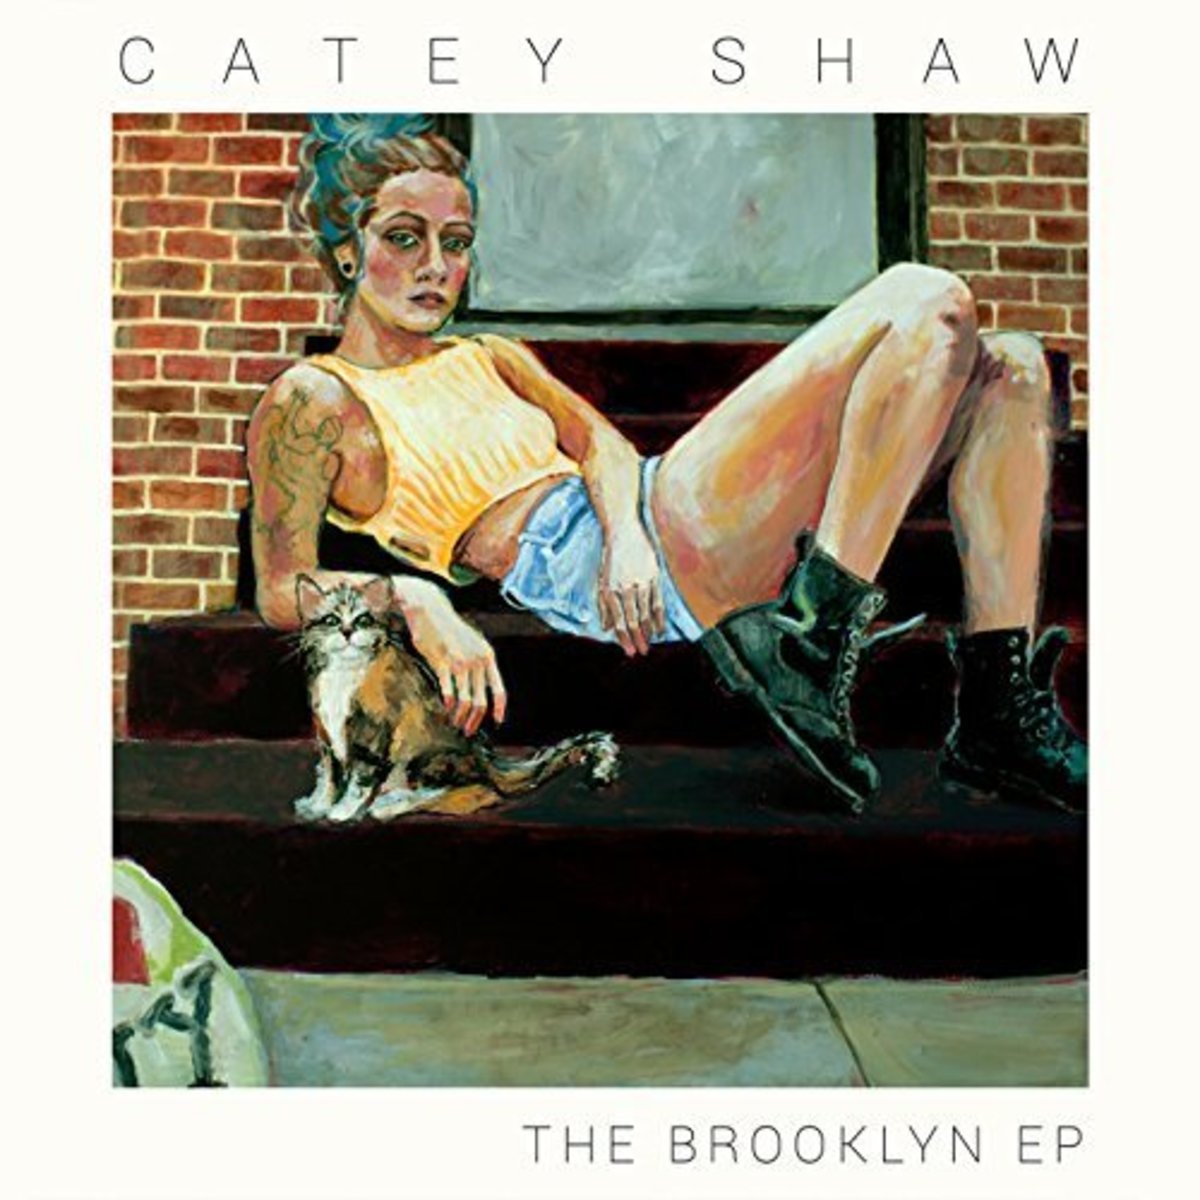 Catey Shaw is an indie musician benefiting from Spotify because she owns her masters and publishing.